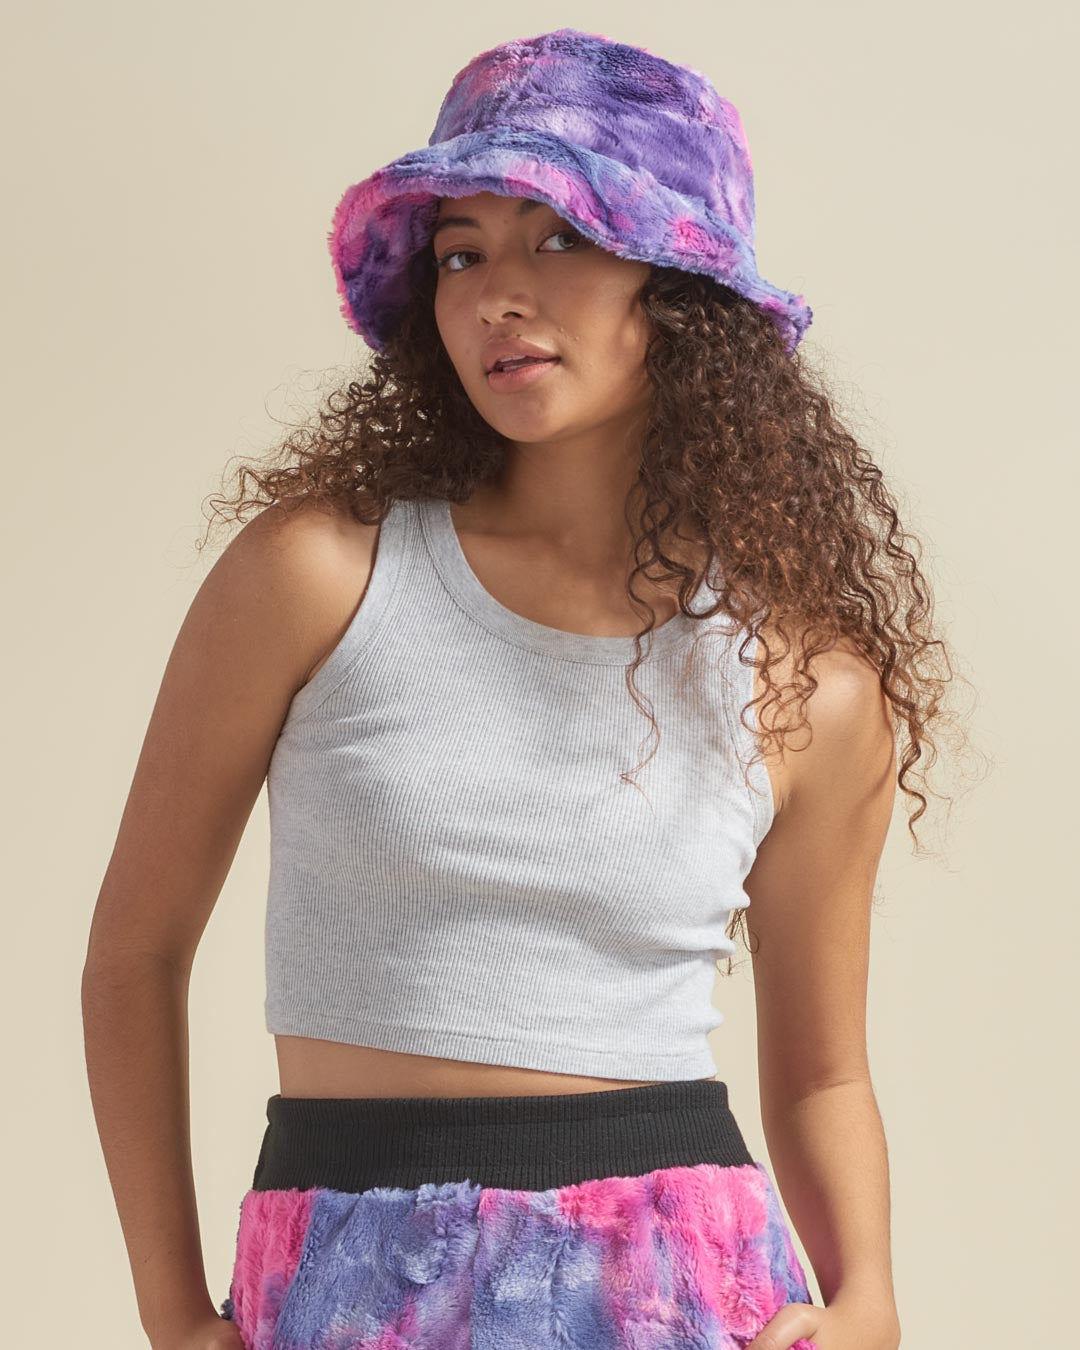 Cotton Candy Faux Fur Bucket Hat on Woman